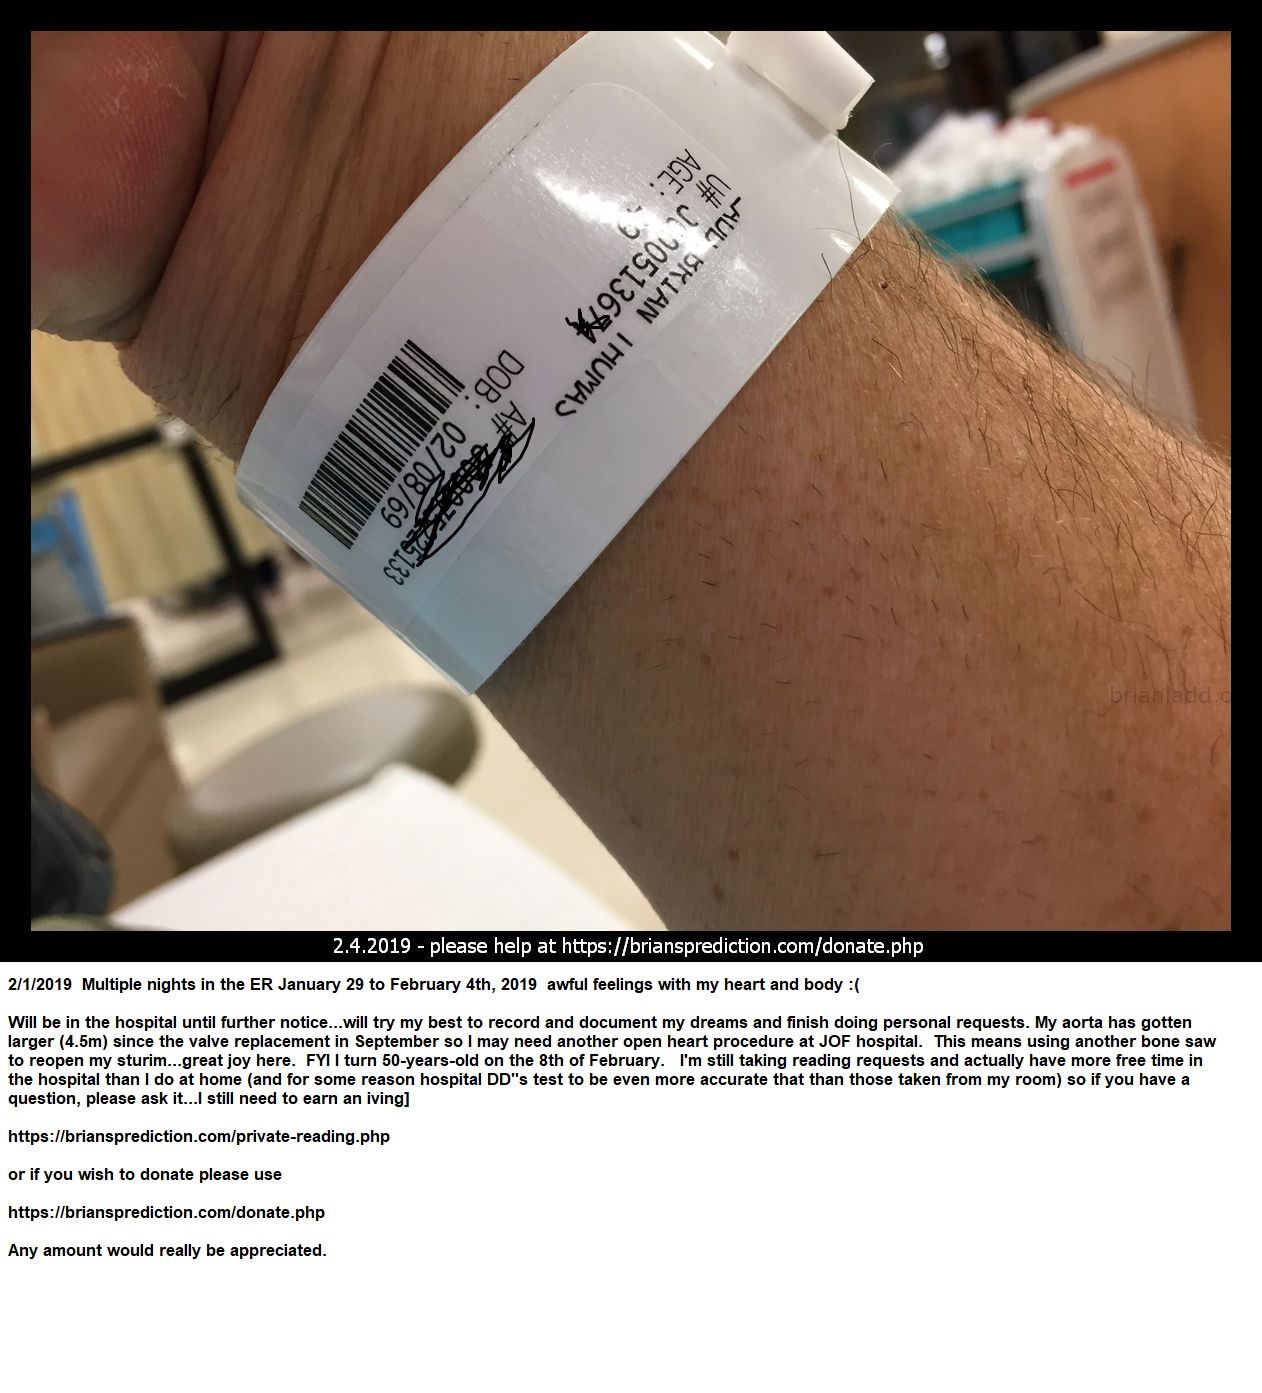 3 2019 Hospital Again - 2/1/2019  Multiple Nights In The Er January 29 To February 4th, 2019  Awful Feelings With My Hea...
2/1/2019  Multiple Nights In The Er January 29 To February 4th, 2019  Awful Feelings With My Heart And Body :(  Will Be In The Hospital Until Further Notice  Will Try My Best To Record And Document My Dreams And Finish Doing Personal Requests. My Aorta Has Gotten Larger (4.5m) Since The Valve Replacement In September So I May Need Another Open Heart Procedure At Jof Hospital.  This Means Using Another Bone Saw To Reopen My Sturim  Great Joy Here.  Fyi I Turn 50-Years-Old On The 8th Of February.  I'M Still Taking Reading Requests And Actually Have More Free Time In The Hospital Than I Do At Home (and For Some Reason Hospital Dd&Quot;S Test To Be Even More Accurate That Than Those Taken From My Room) So If You Have A Question, Please Ask It  I Still Need To Earn A Living]  Or If You Wish To Donate Please Use  Any Amount Would Really Be Appreciated.
